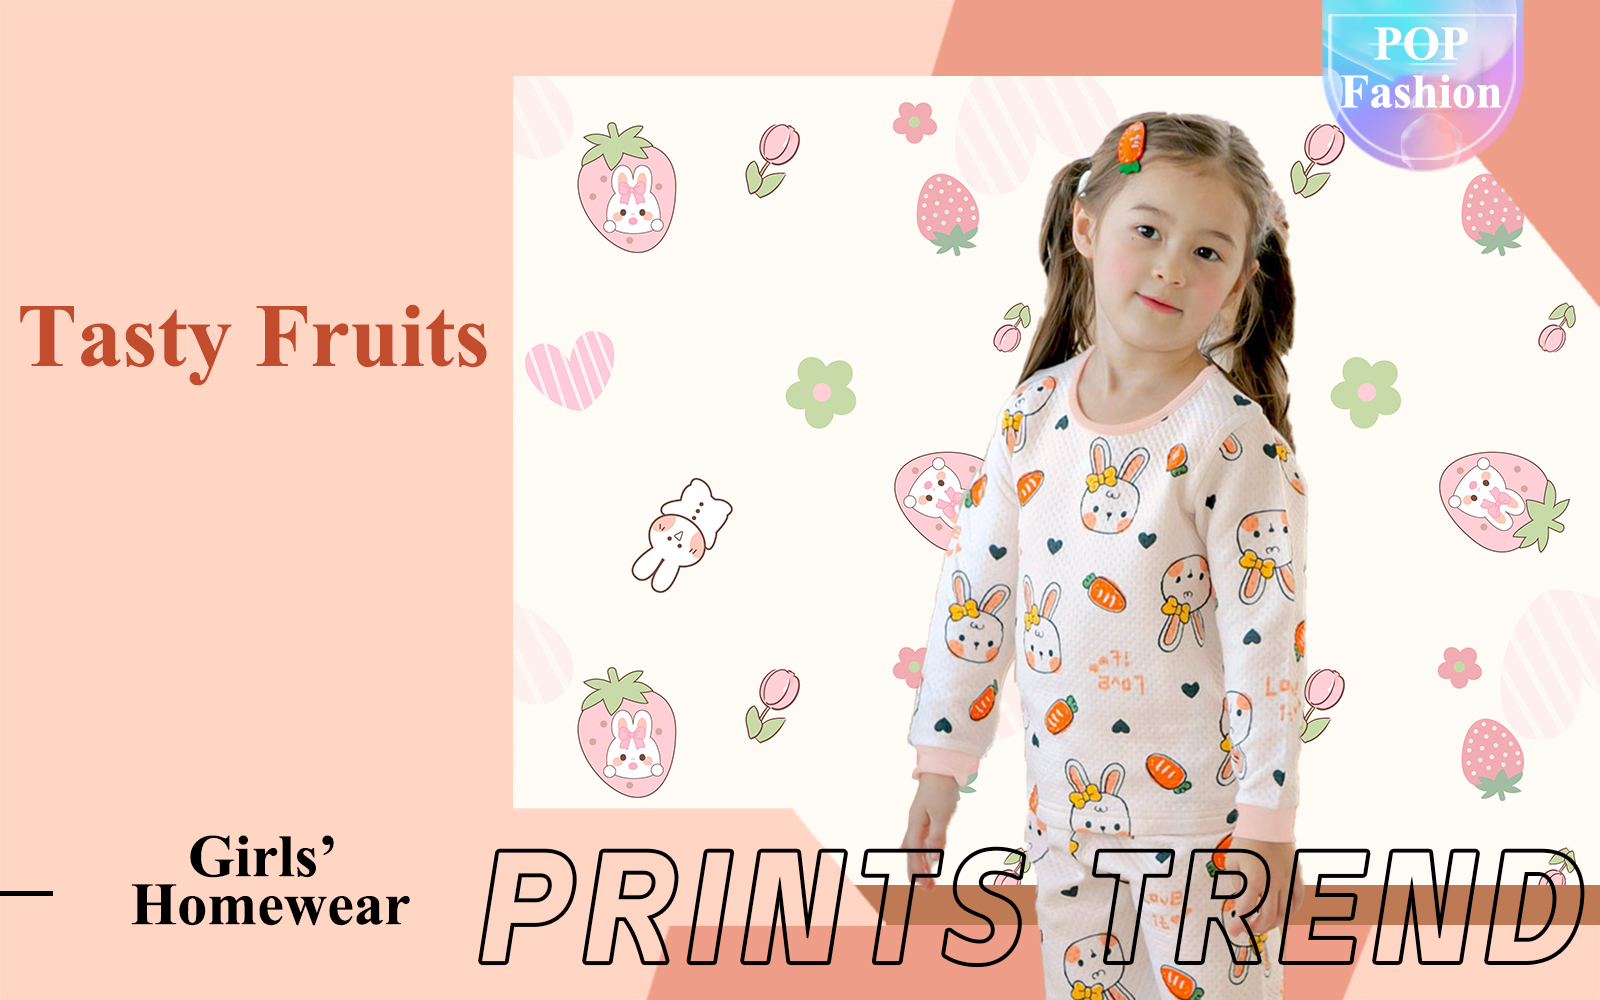 Tasty Fruits -- The Pattern Trend for Girls' Homewear